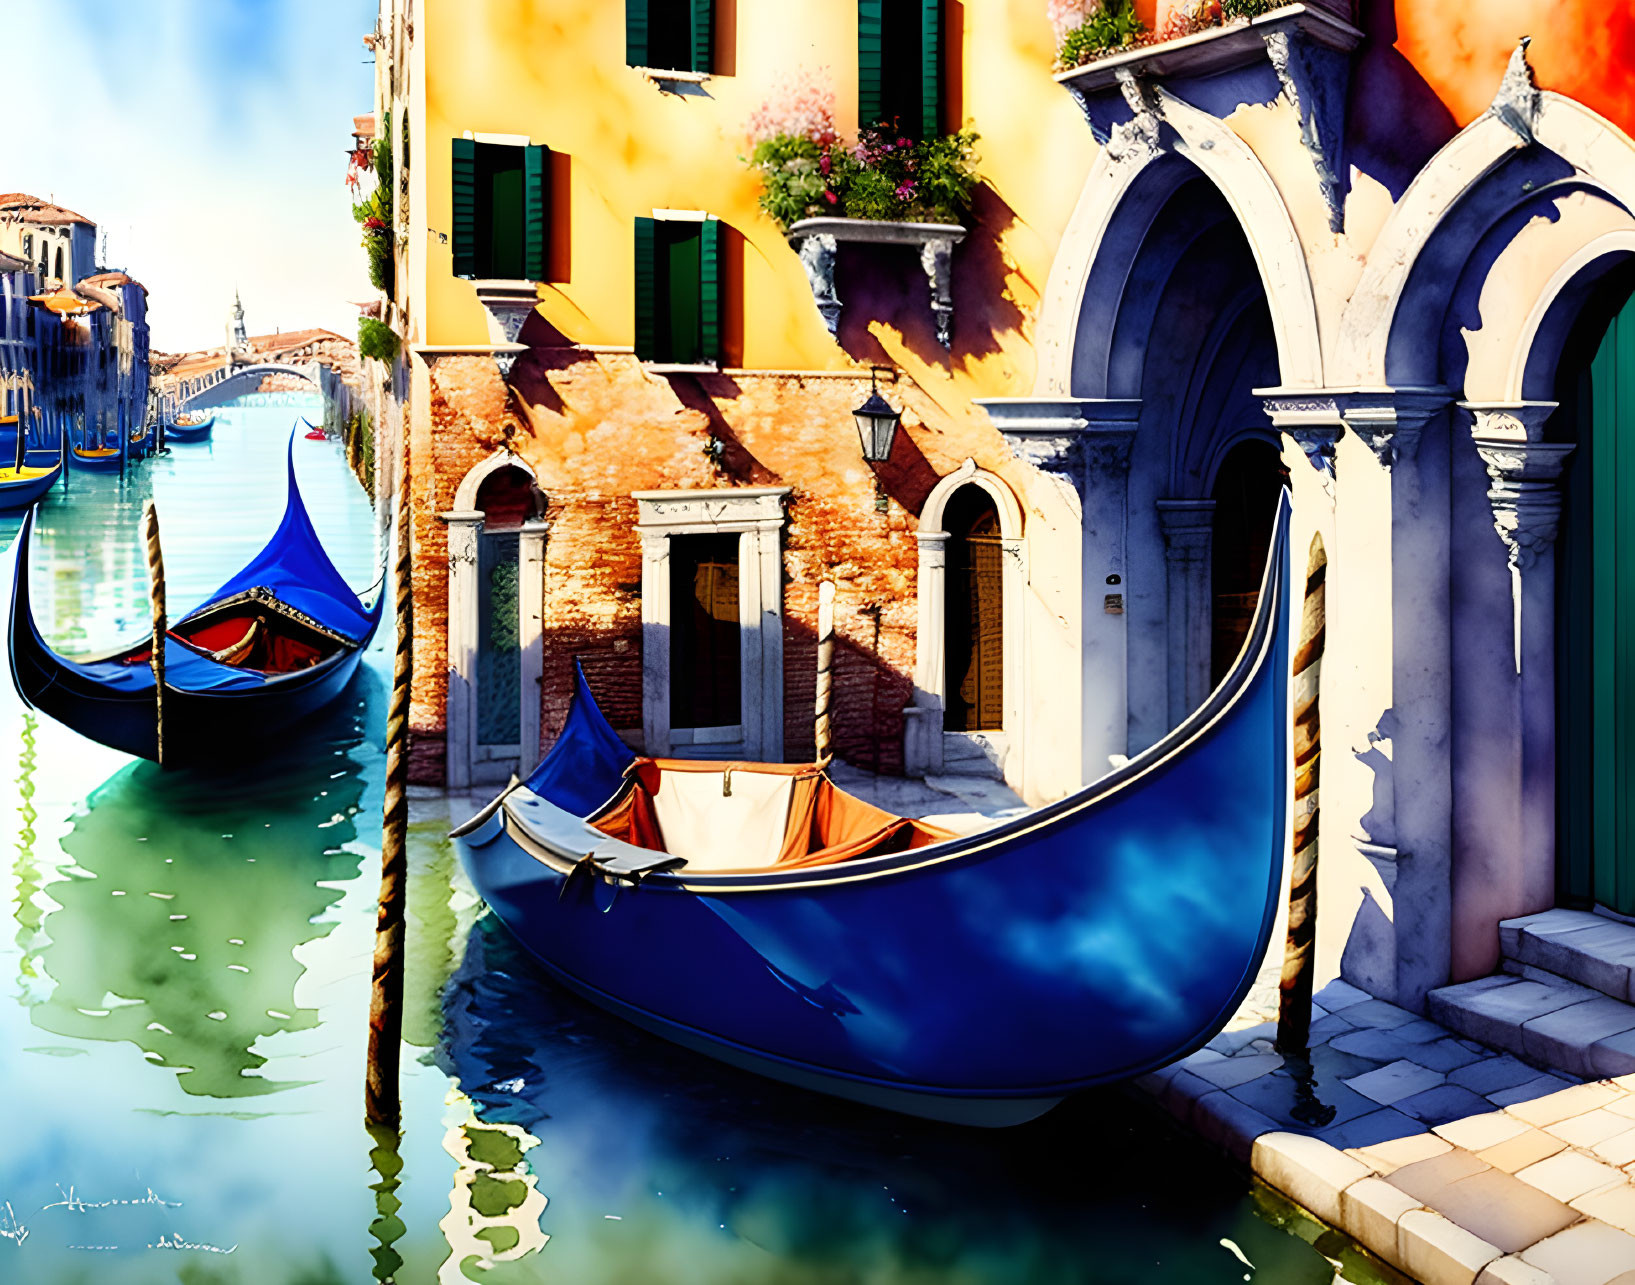 Colorful Venice Canal Scene with Gondolas and Flowers